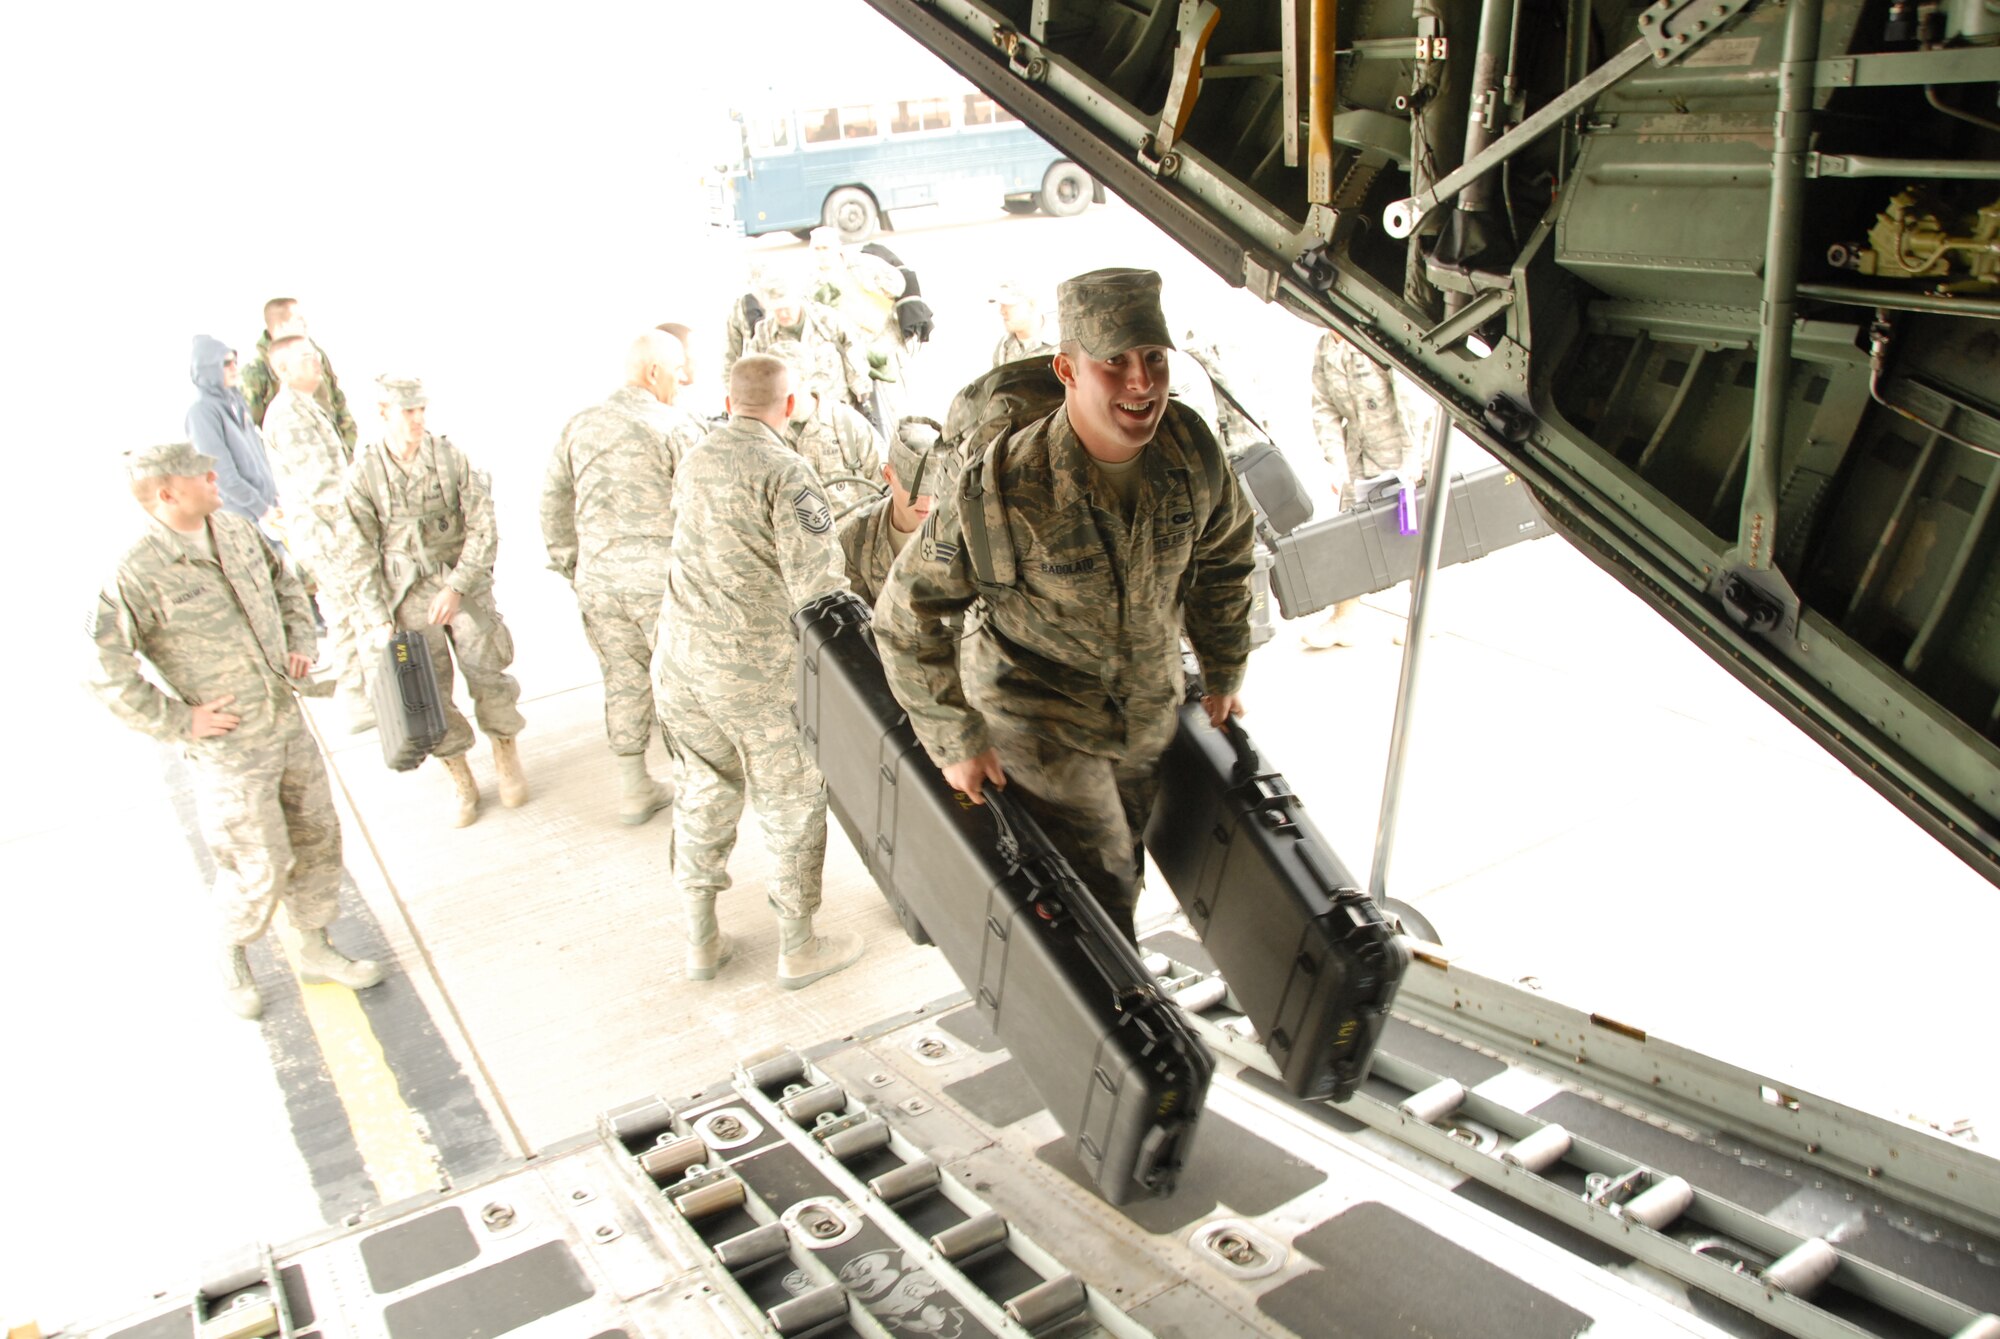 Members from the 107th Air Refueling Wing Air National Guard deployed to Iraq Feb. 25 at 2 p.m.  While deployed, the members will secure Air Force personnel and assets in theatre.  